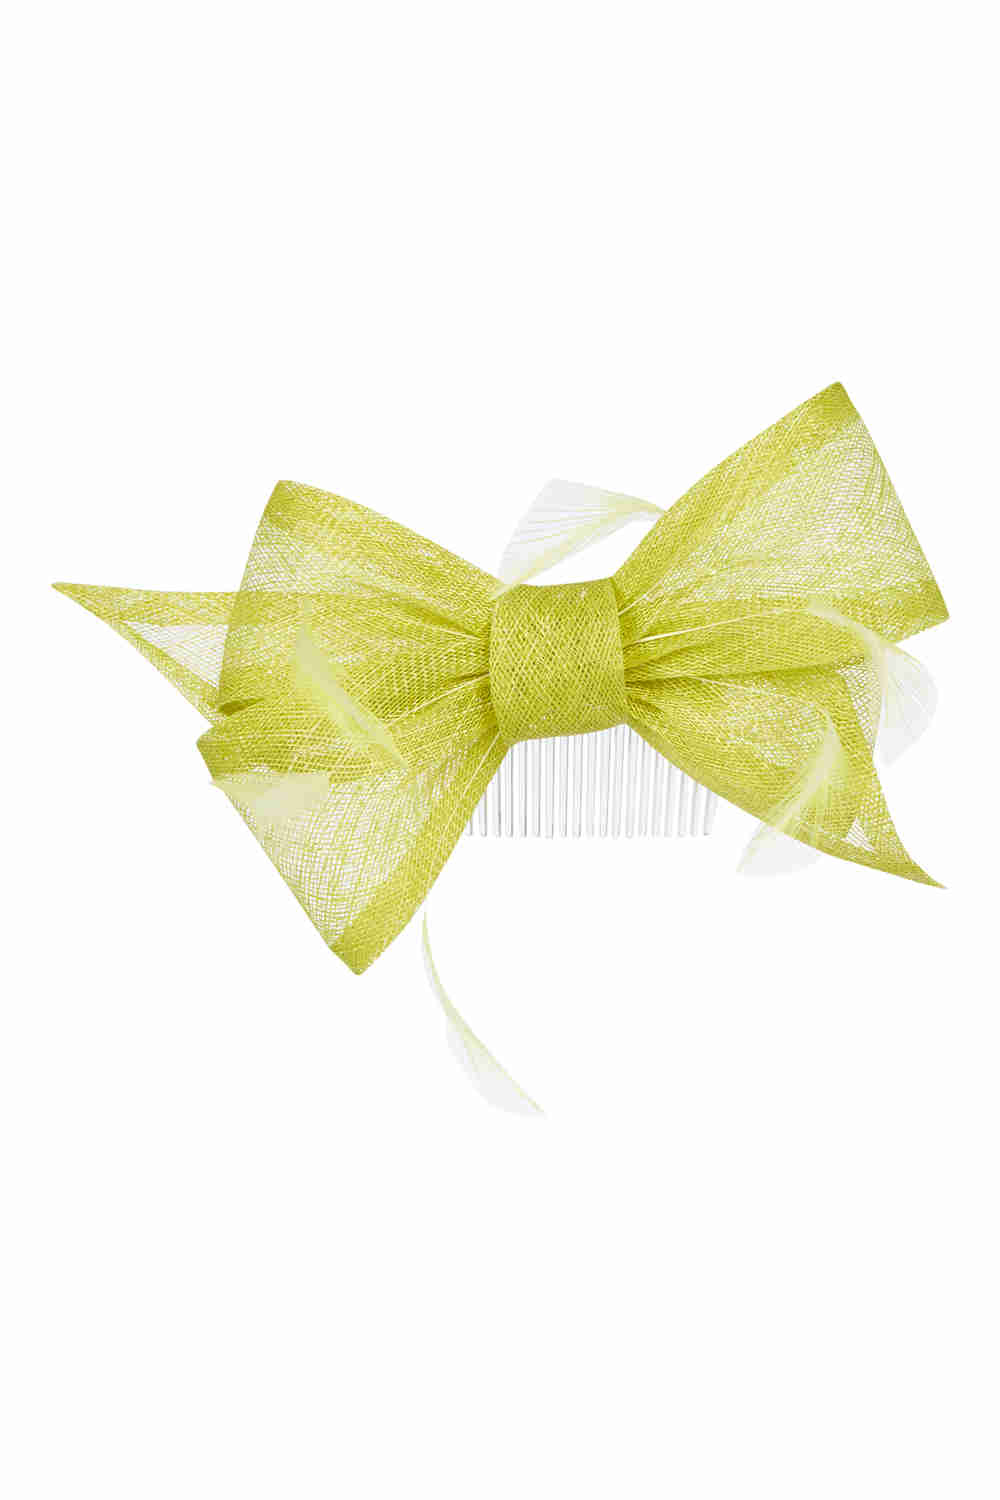 Bow and Feather Hair Comb Fascinator